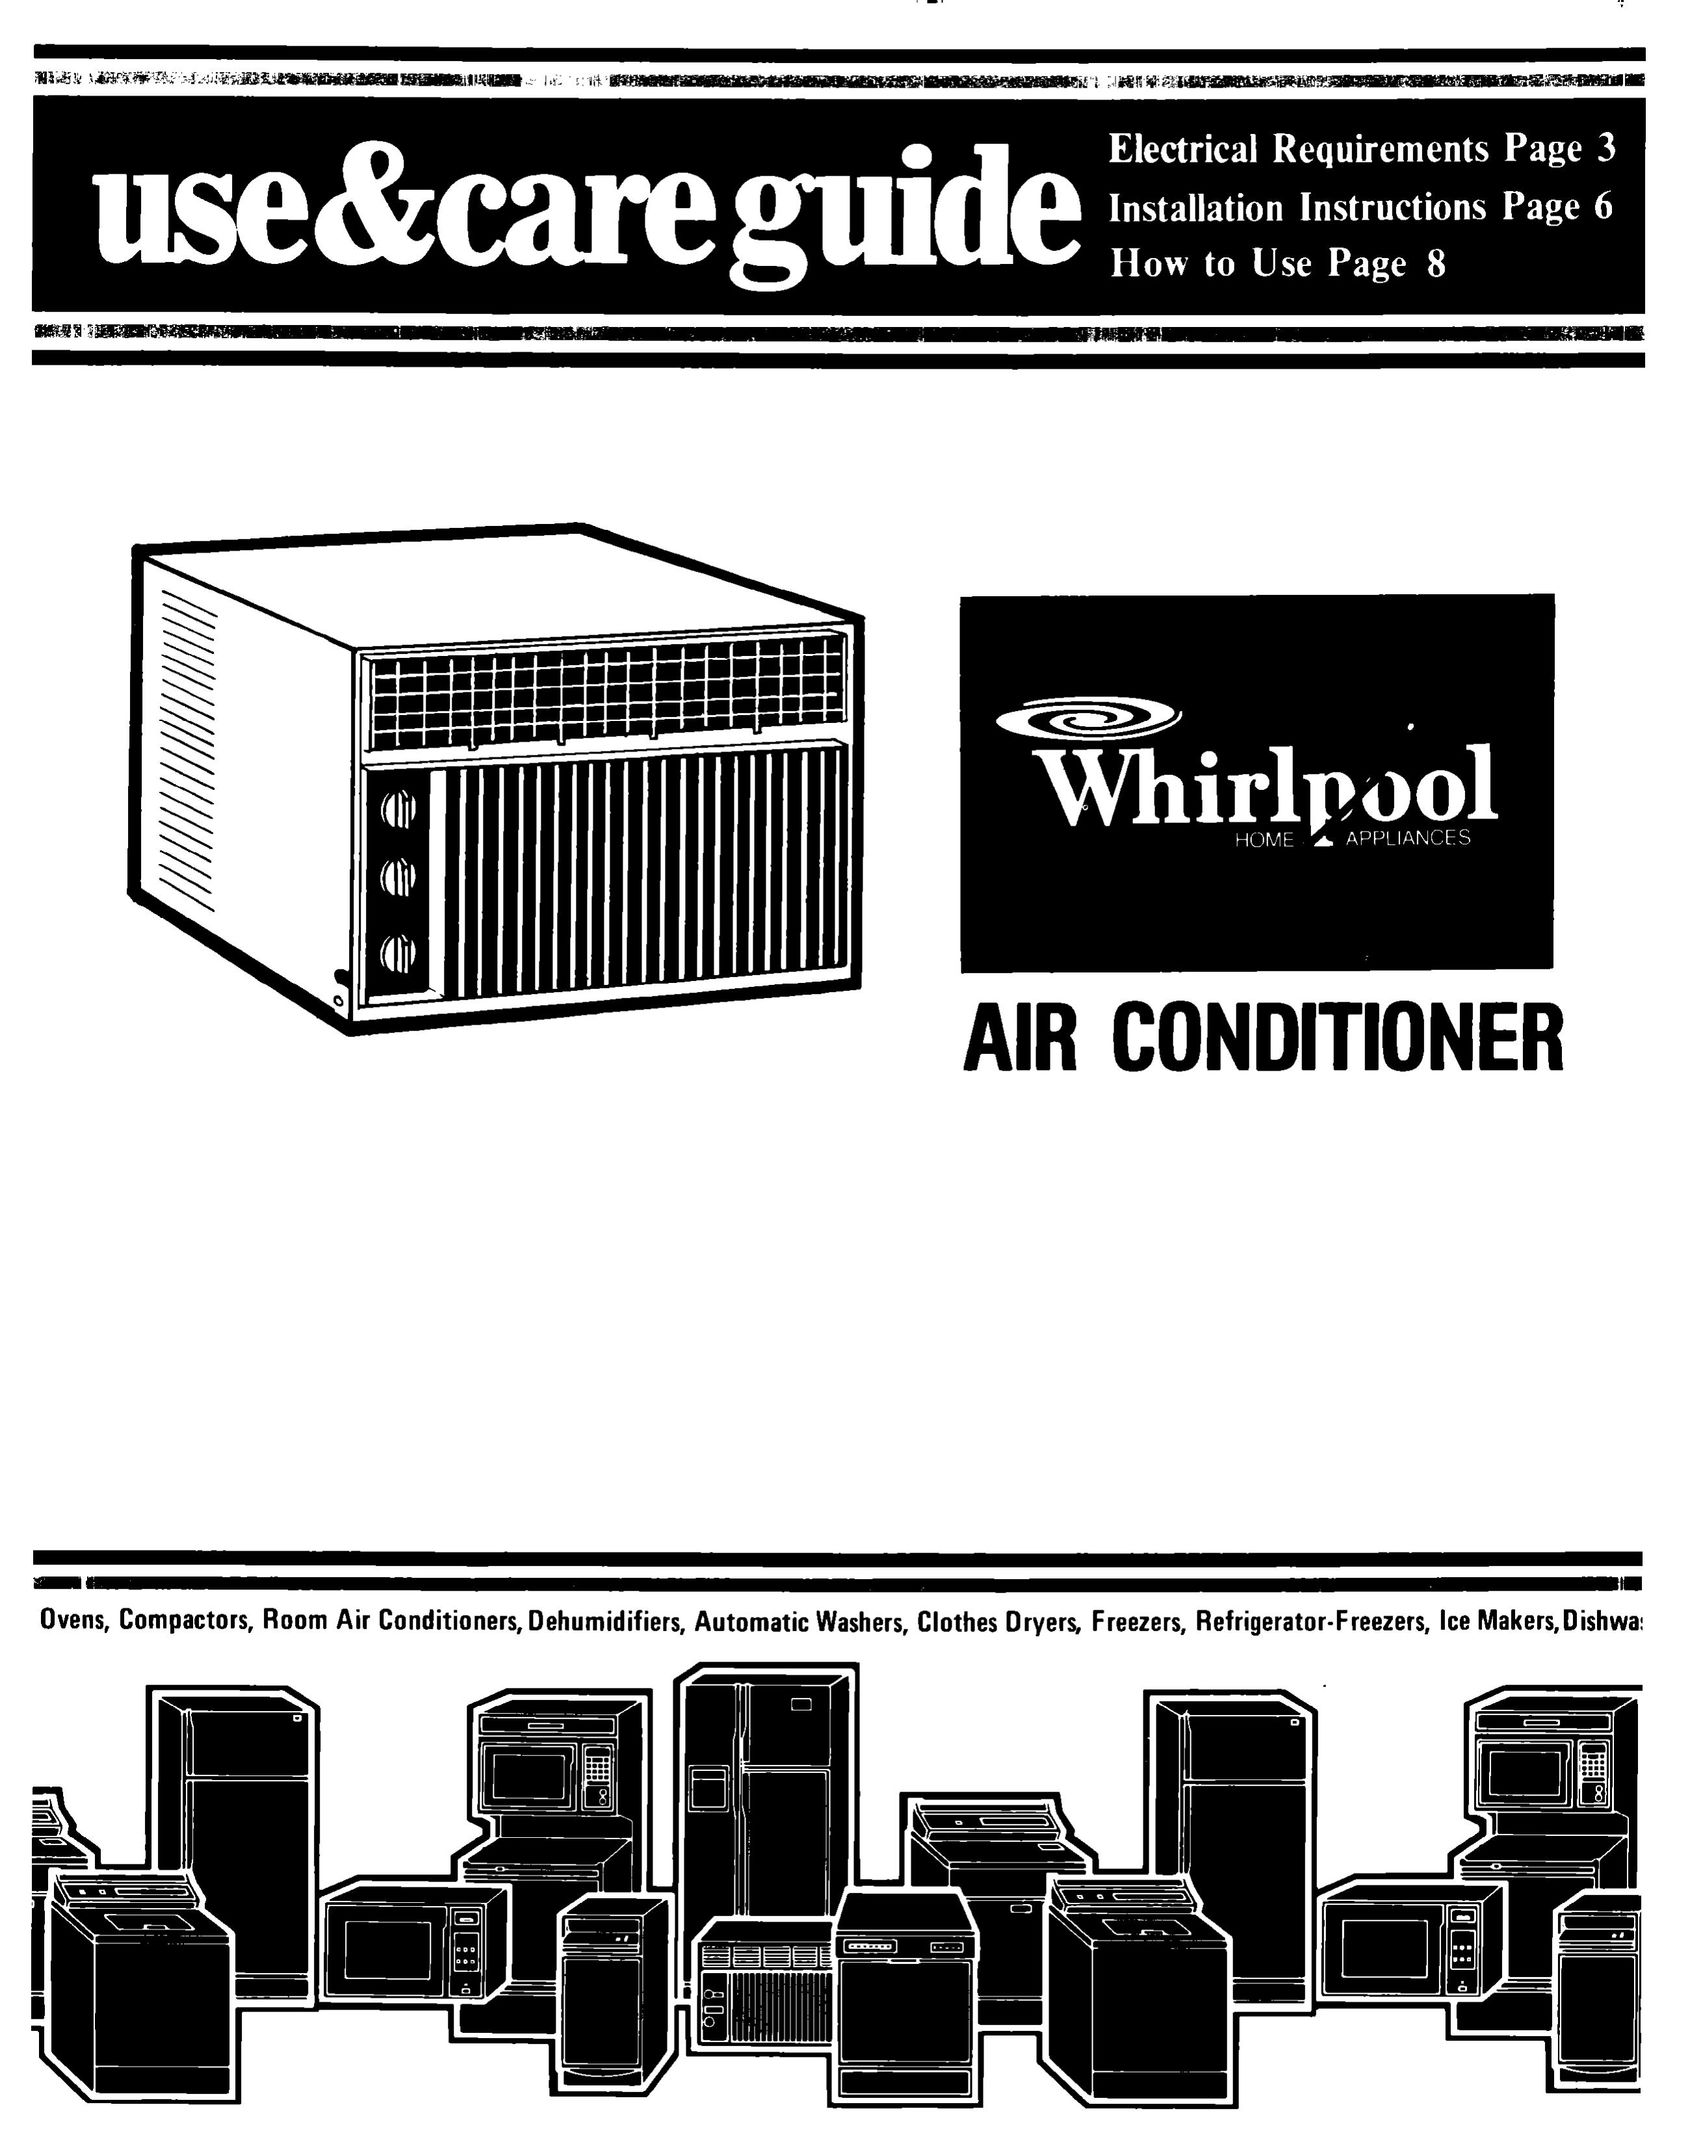 Whirlpool ACE094XM0 Air Conditioner User Manual